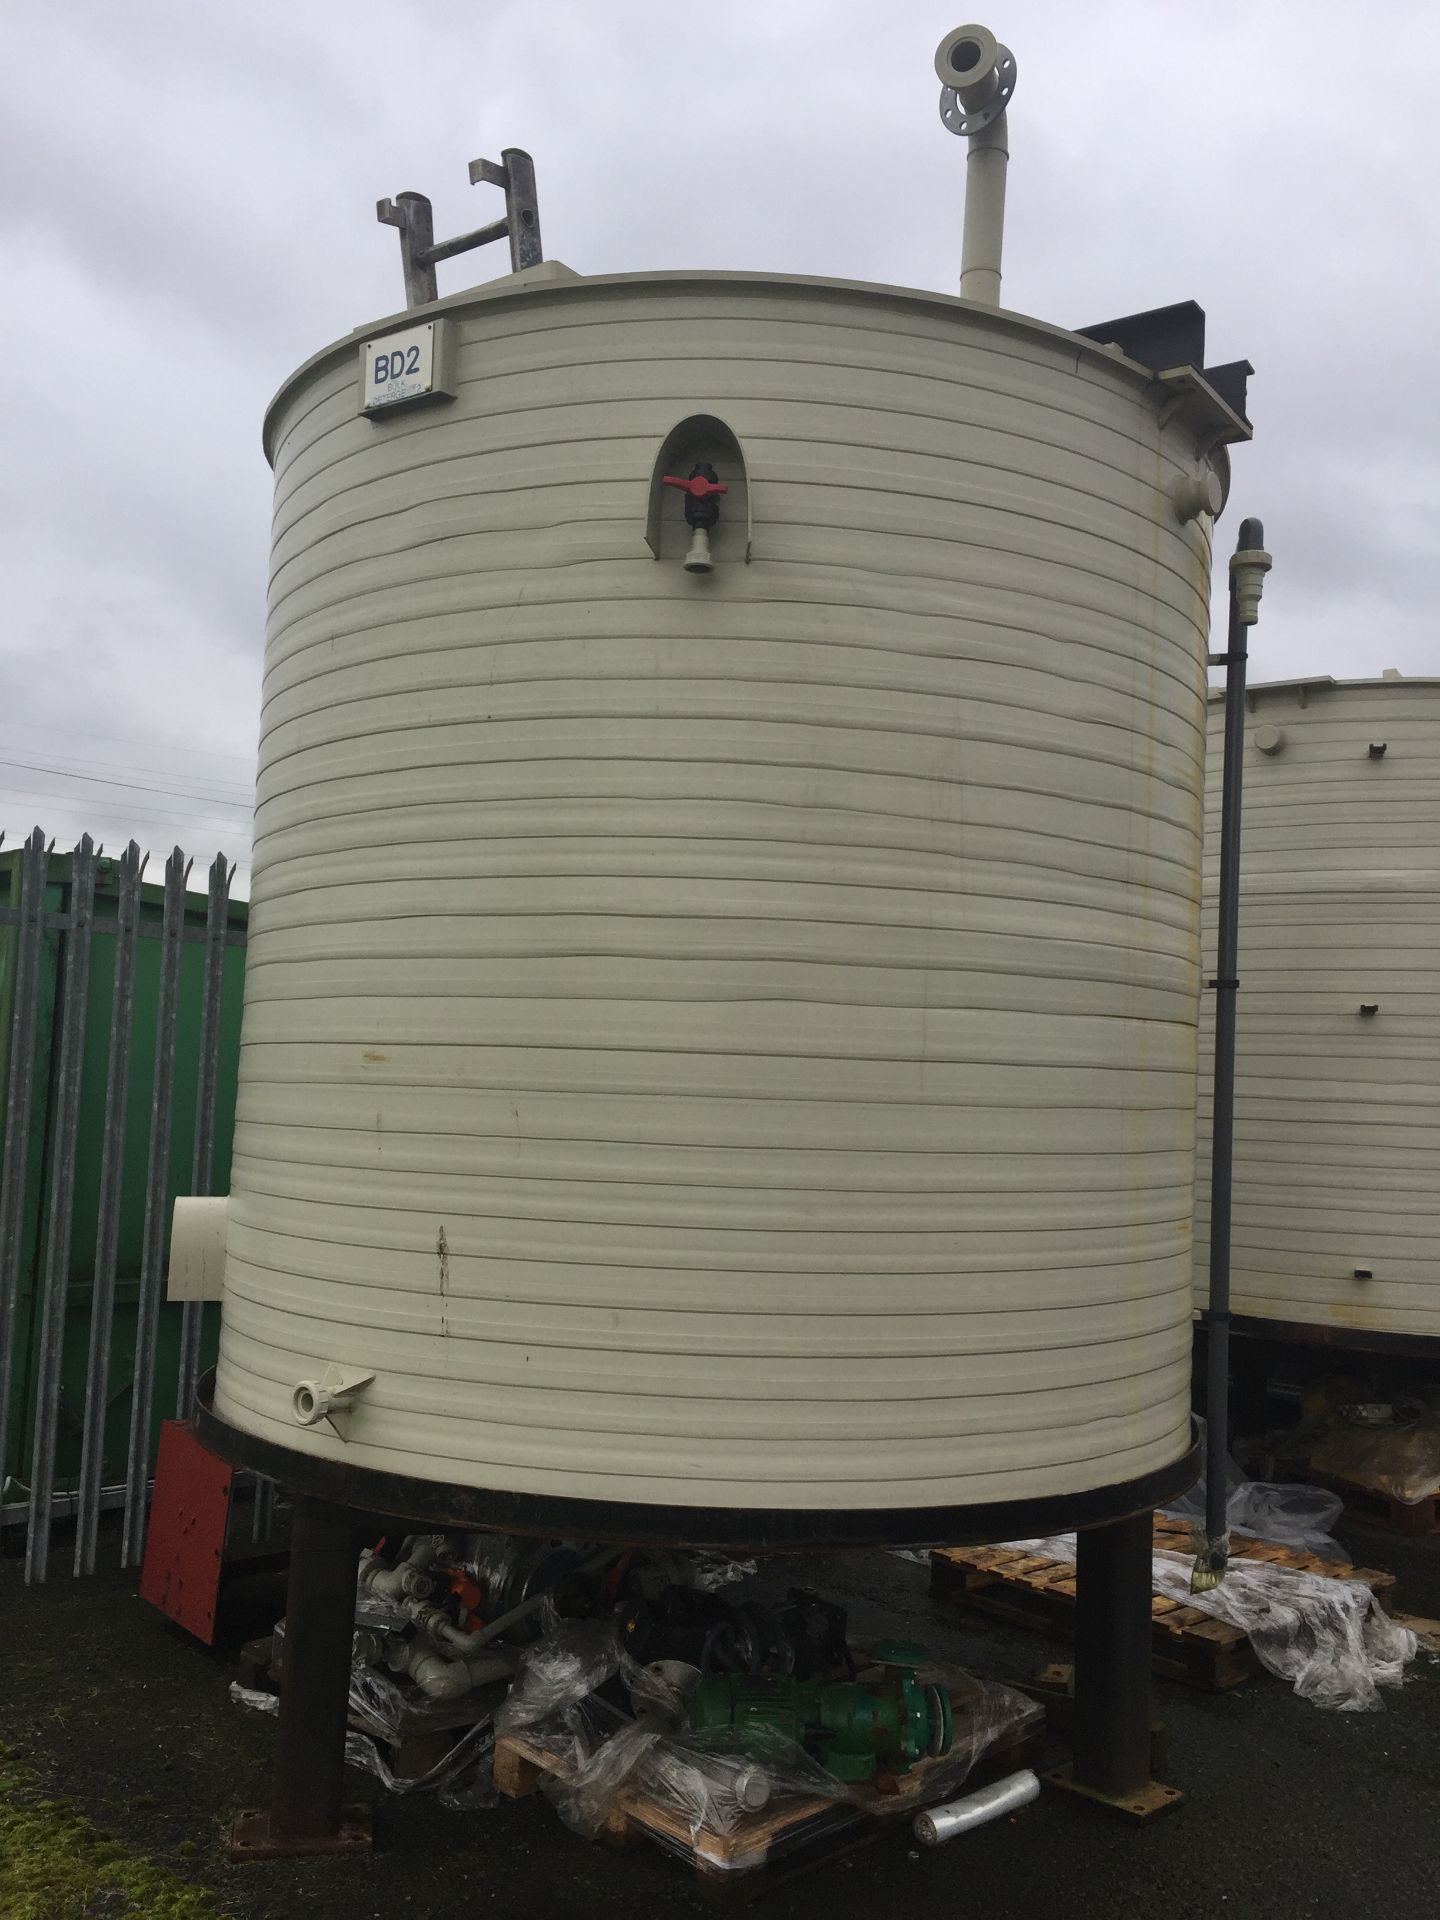 1 x BD2 12,000 Litre Polypropylene Chem Resist Tank - Location: Oldham Has been used for detergent - Image 6 of 7